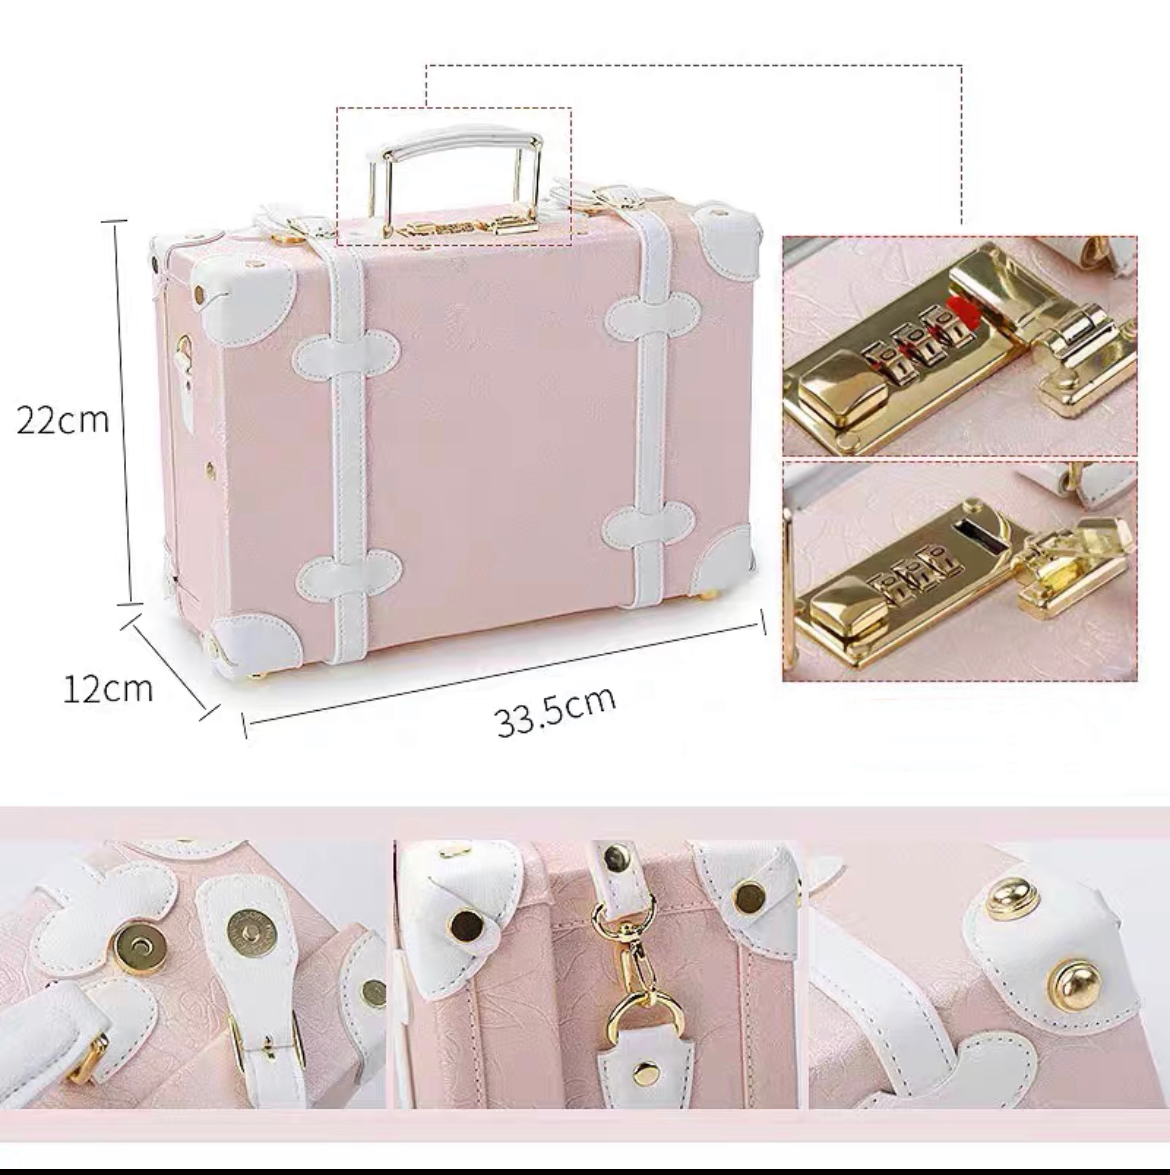 Protective and Stylish Blythe Doll Carry Case - Perfect for Travel and Storage 02